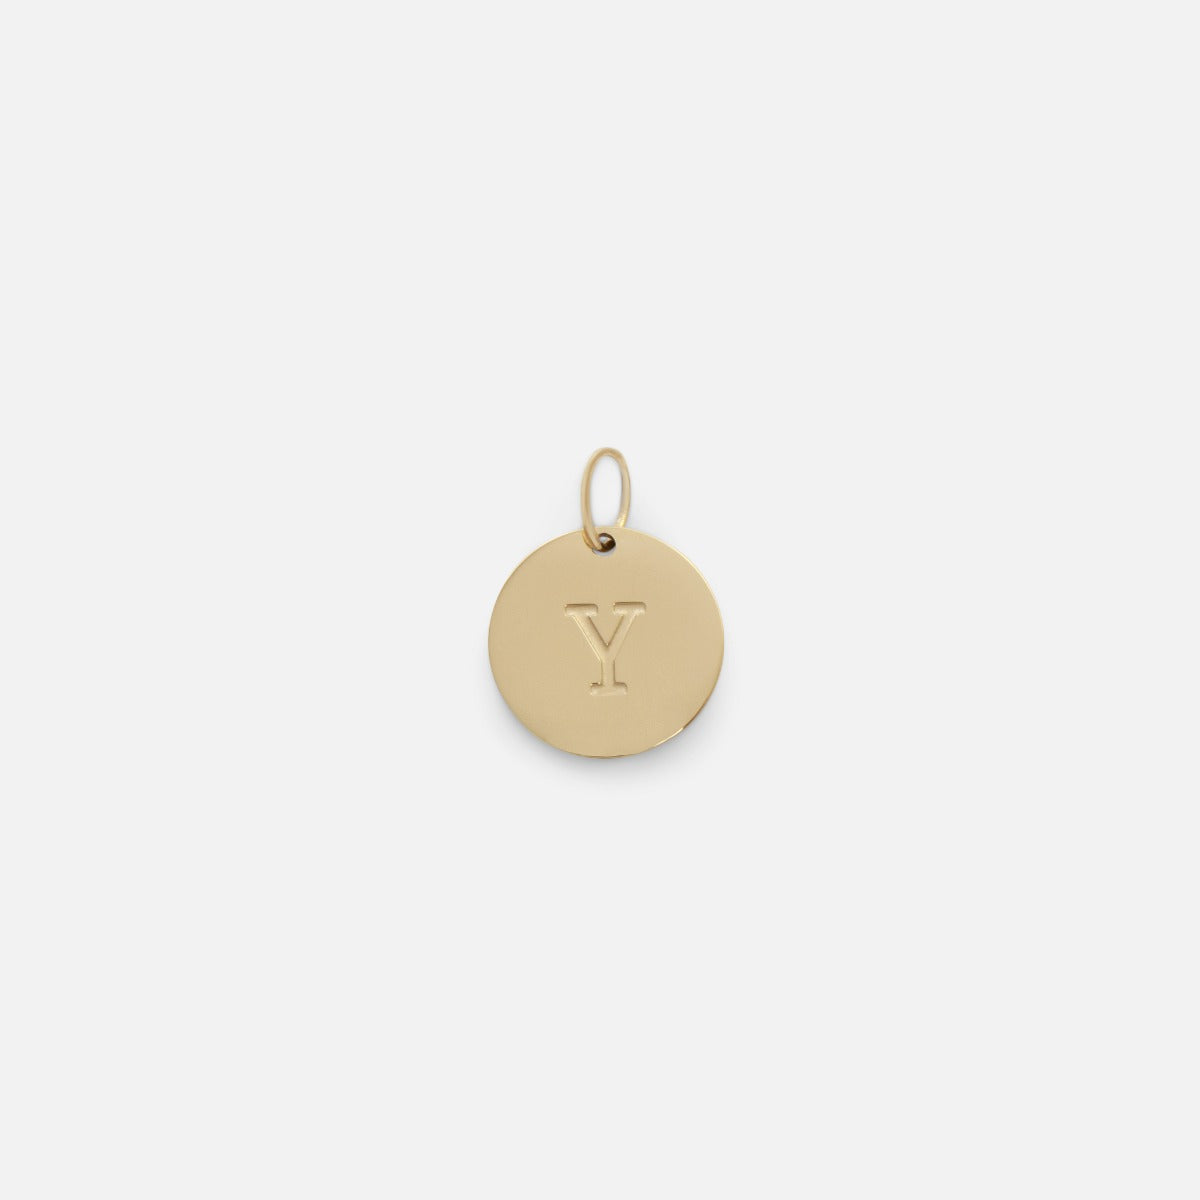 Small symbolic golden charm engraved with the letter of the alphabet "y"